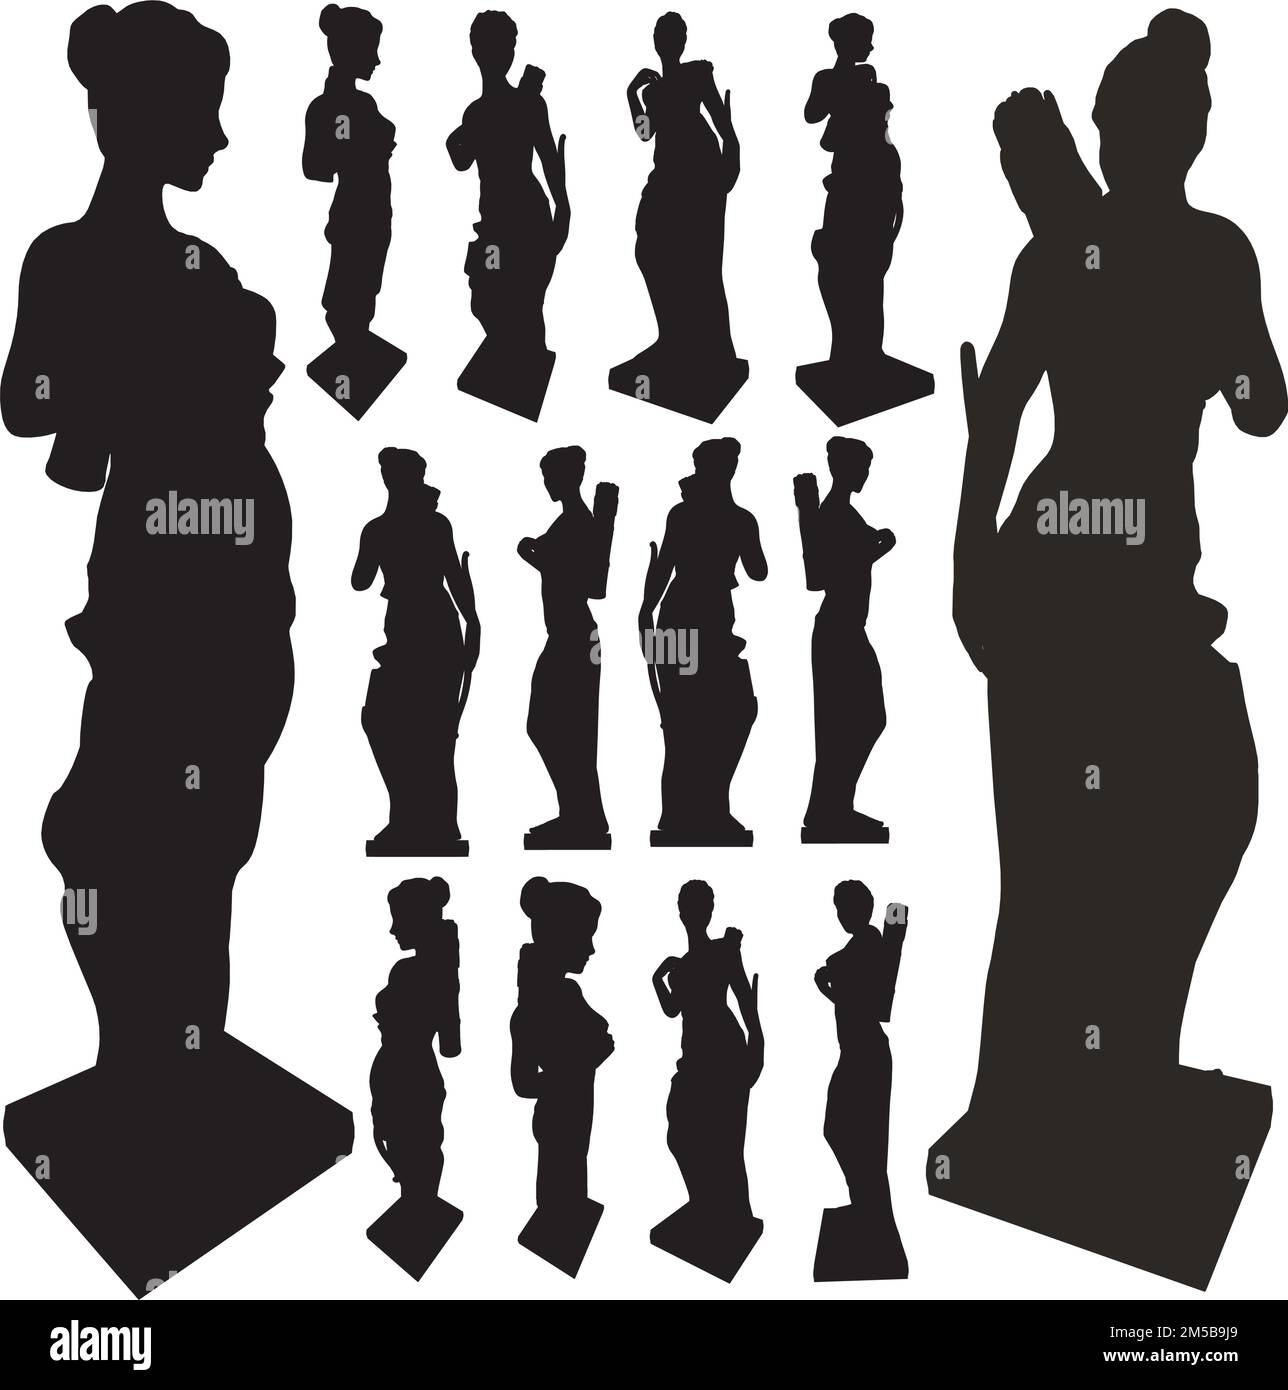 Ancient Statue Of Woman Silhouettes Vector. Illustration Isolated On White Background. A Vector Illustration Of Antique Statue. Stock Vector